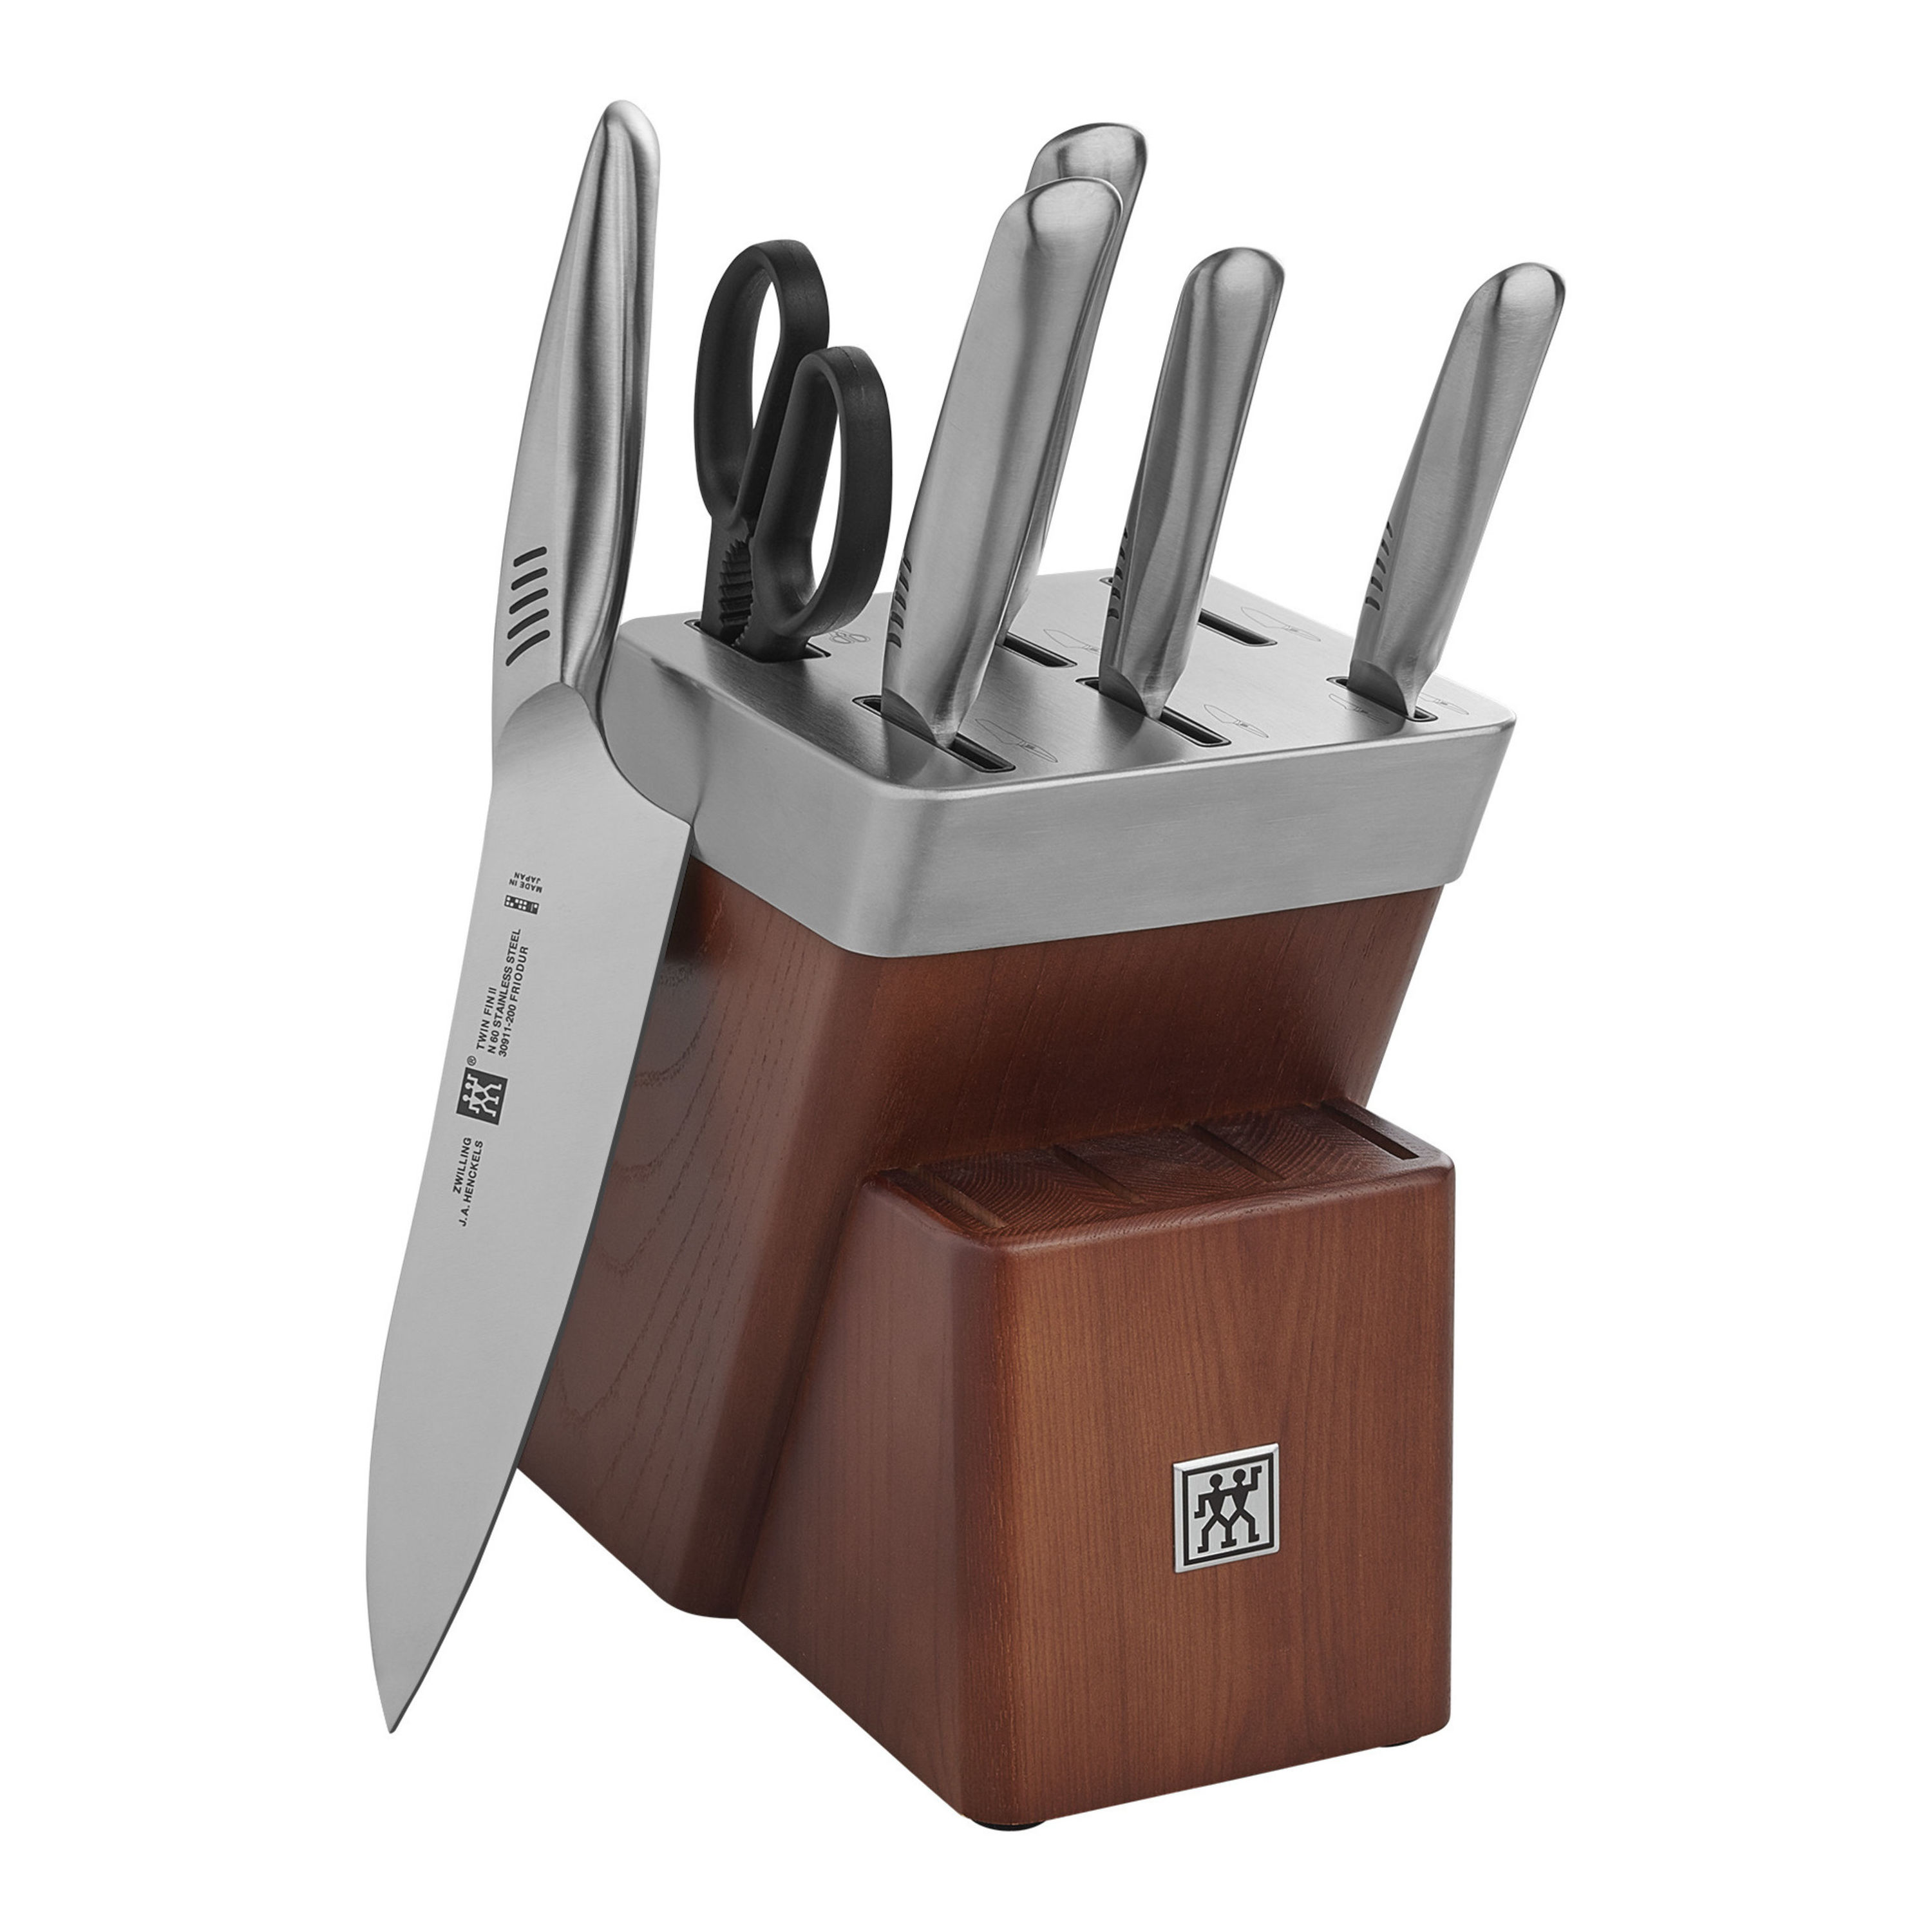 https://www.zwilling.com/on/demandware.static/-/Sites-zwilling-master-catalog/default/dw02f54b8a/images/large/30920-007_1.jpg